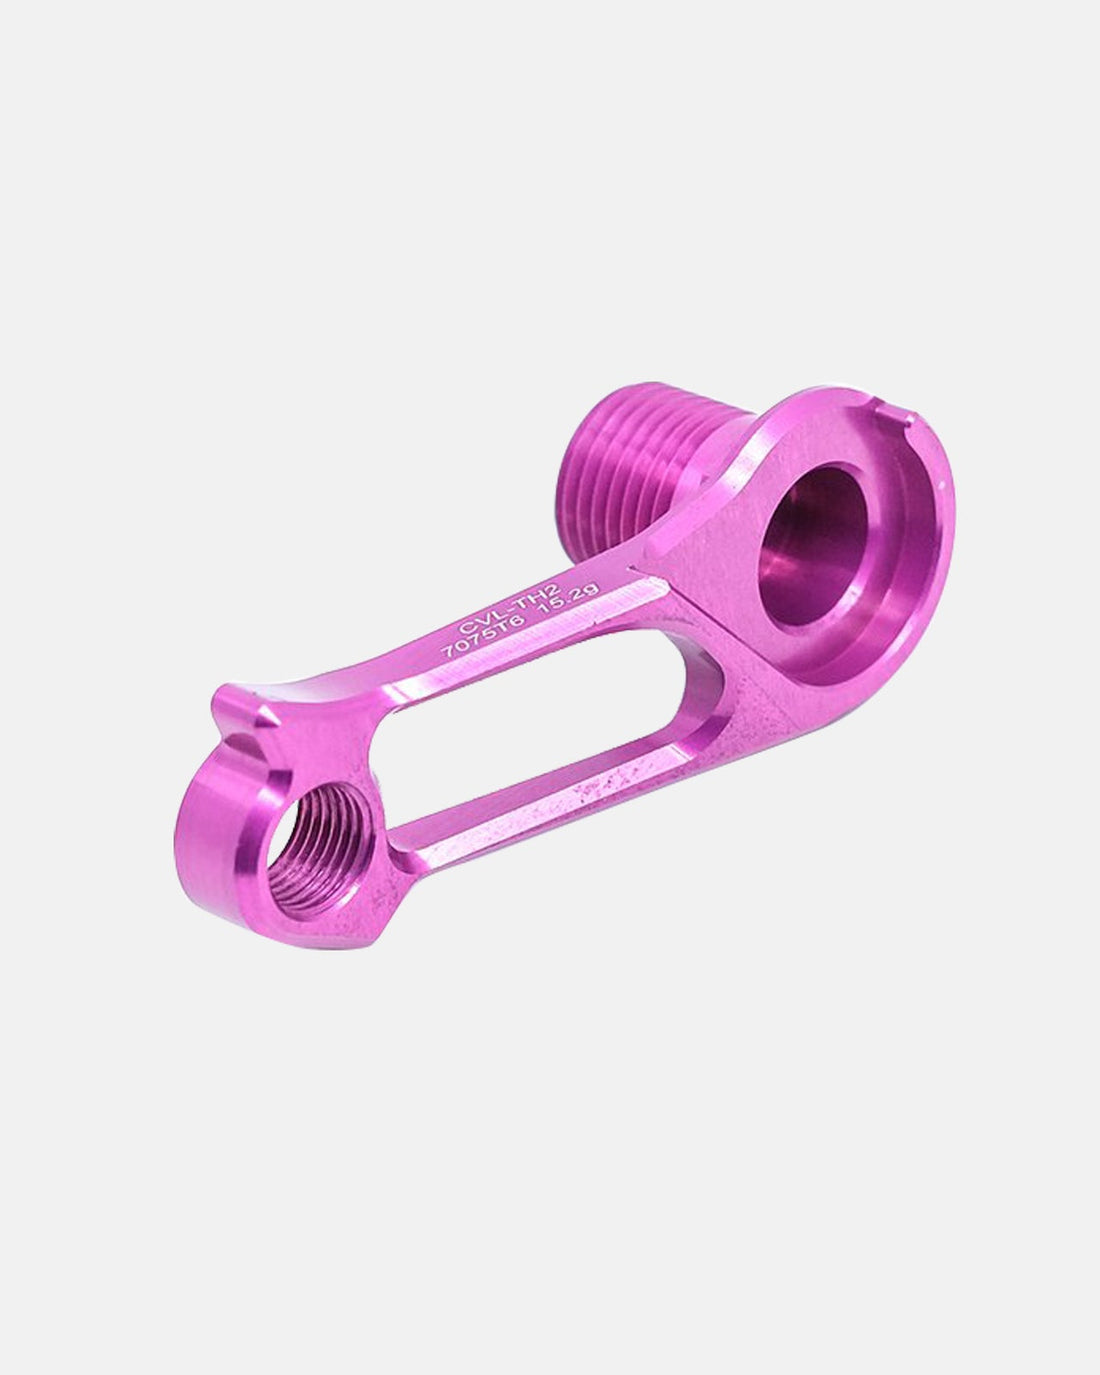 Sigeyi Cervelo Direct-Mount Derailleur Hanger - Anodized Pink - Sigeyi